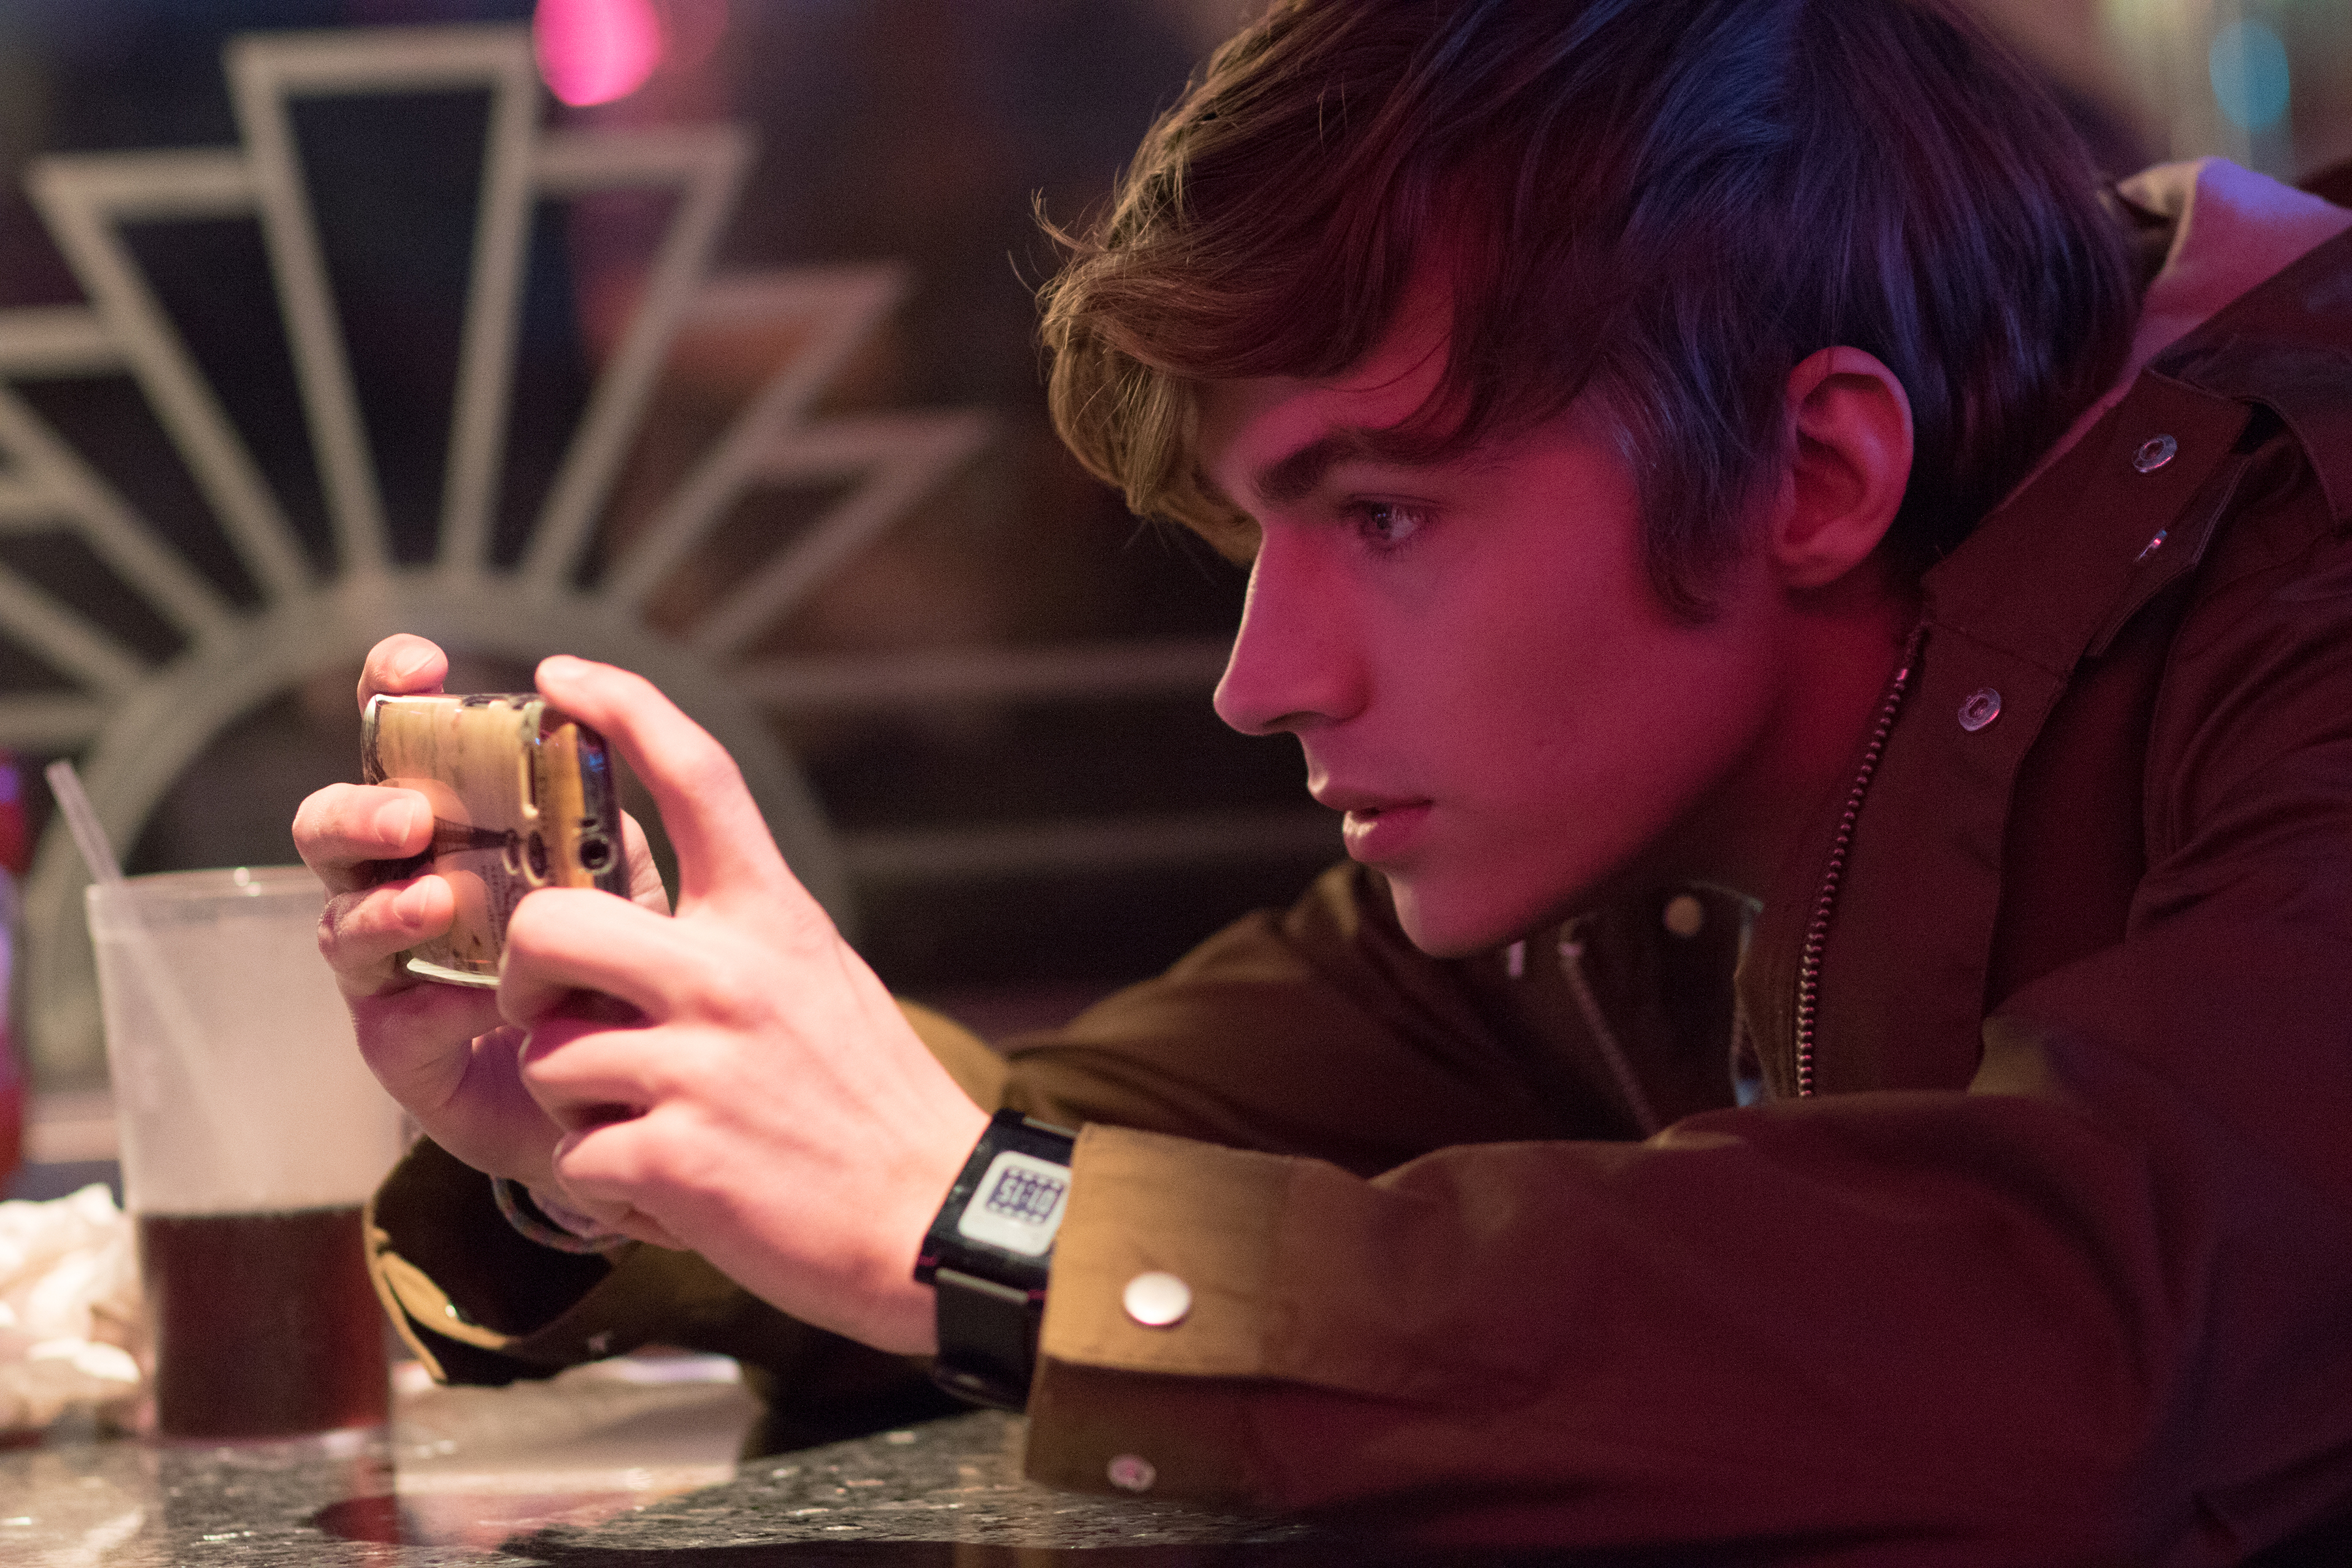  Miles Heizer stars as &lsquo;Tommy&rsquo; in NERVE. Photo Credit: Niko Tavernise 